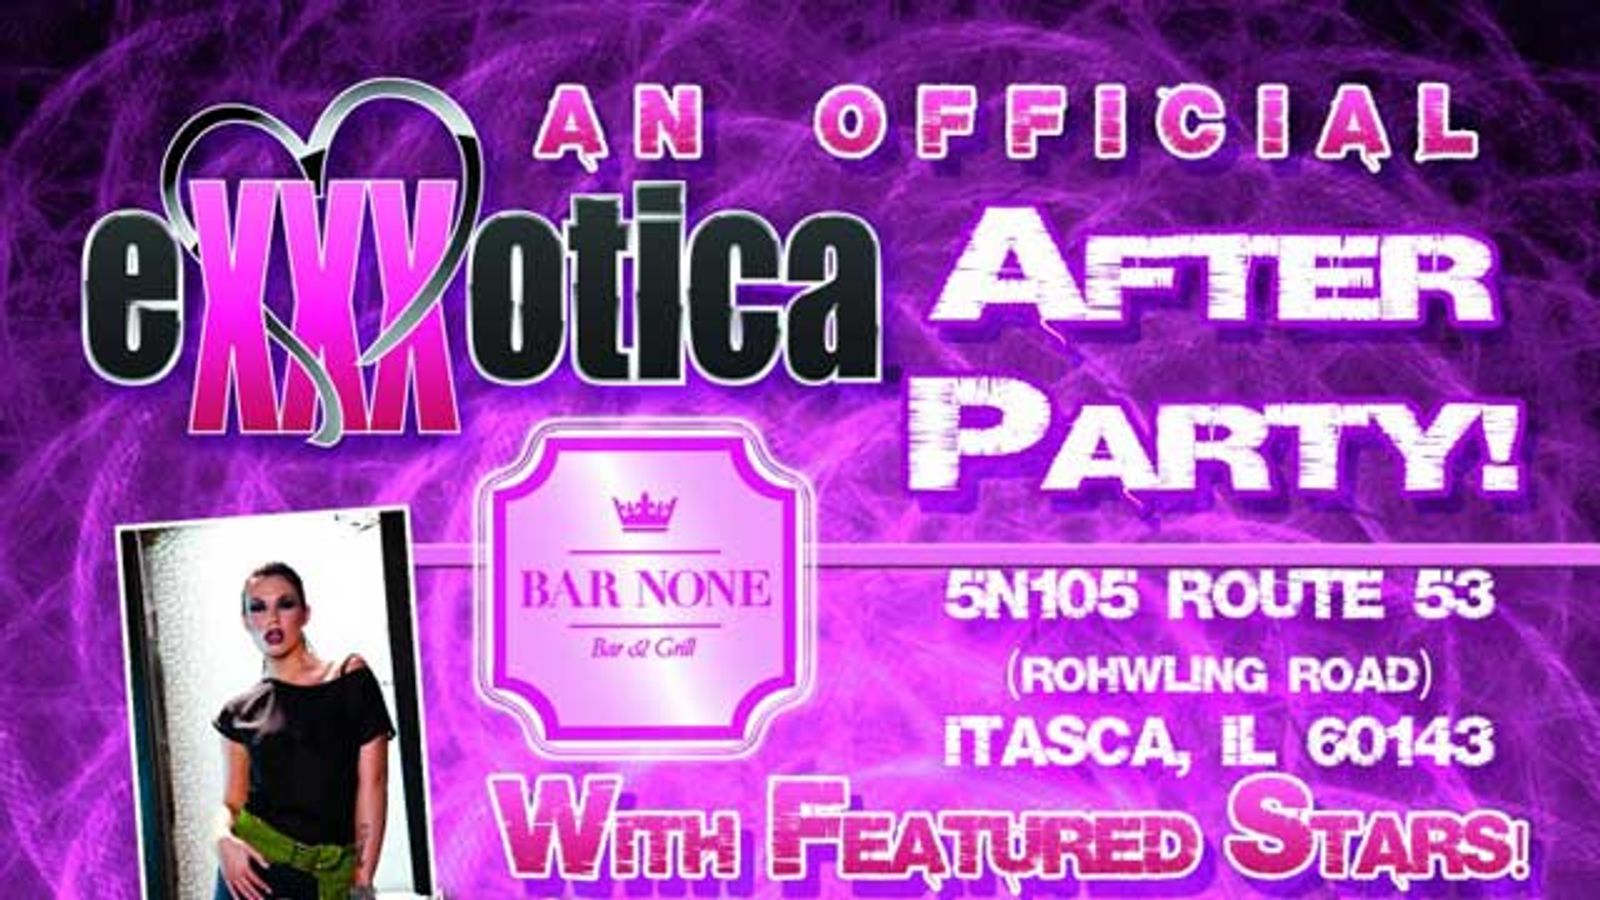 eXXXotica Chicago After Parties Announced for Bar None